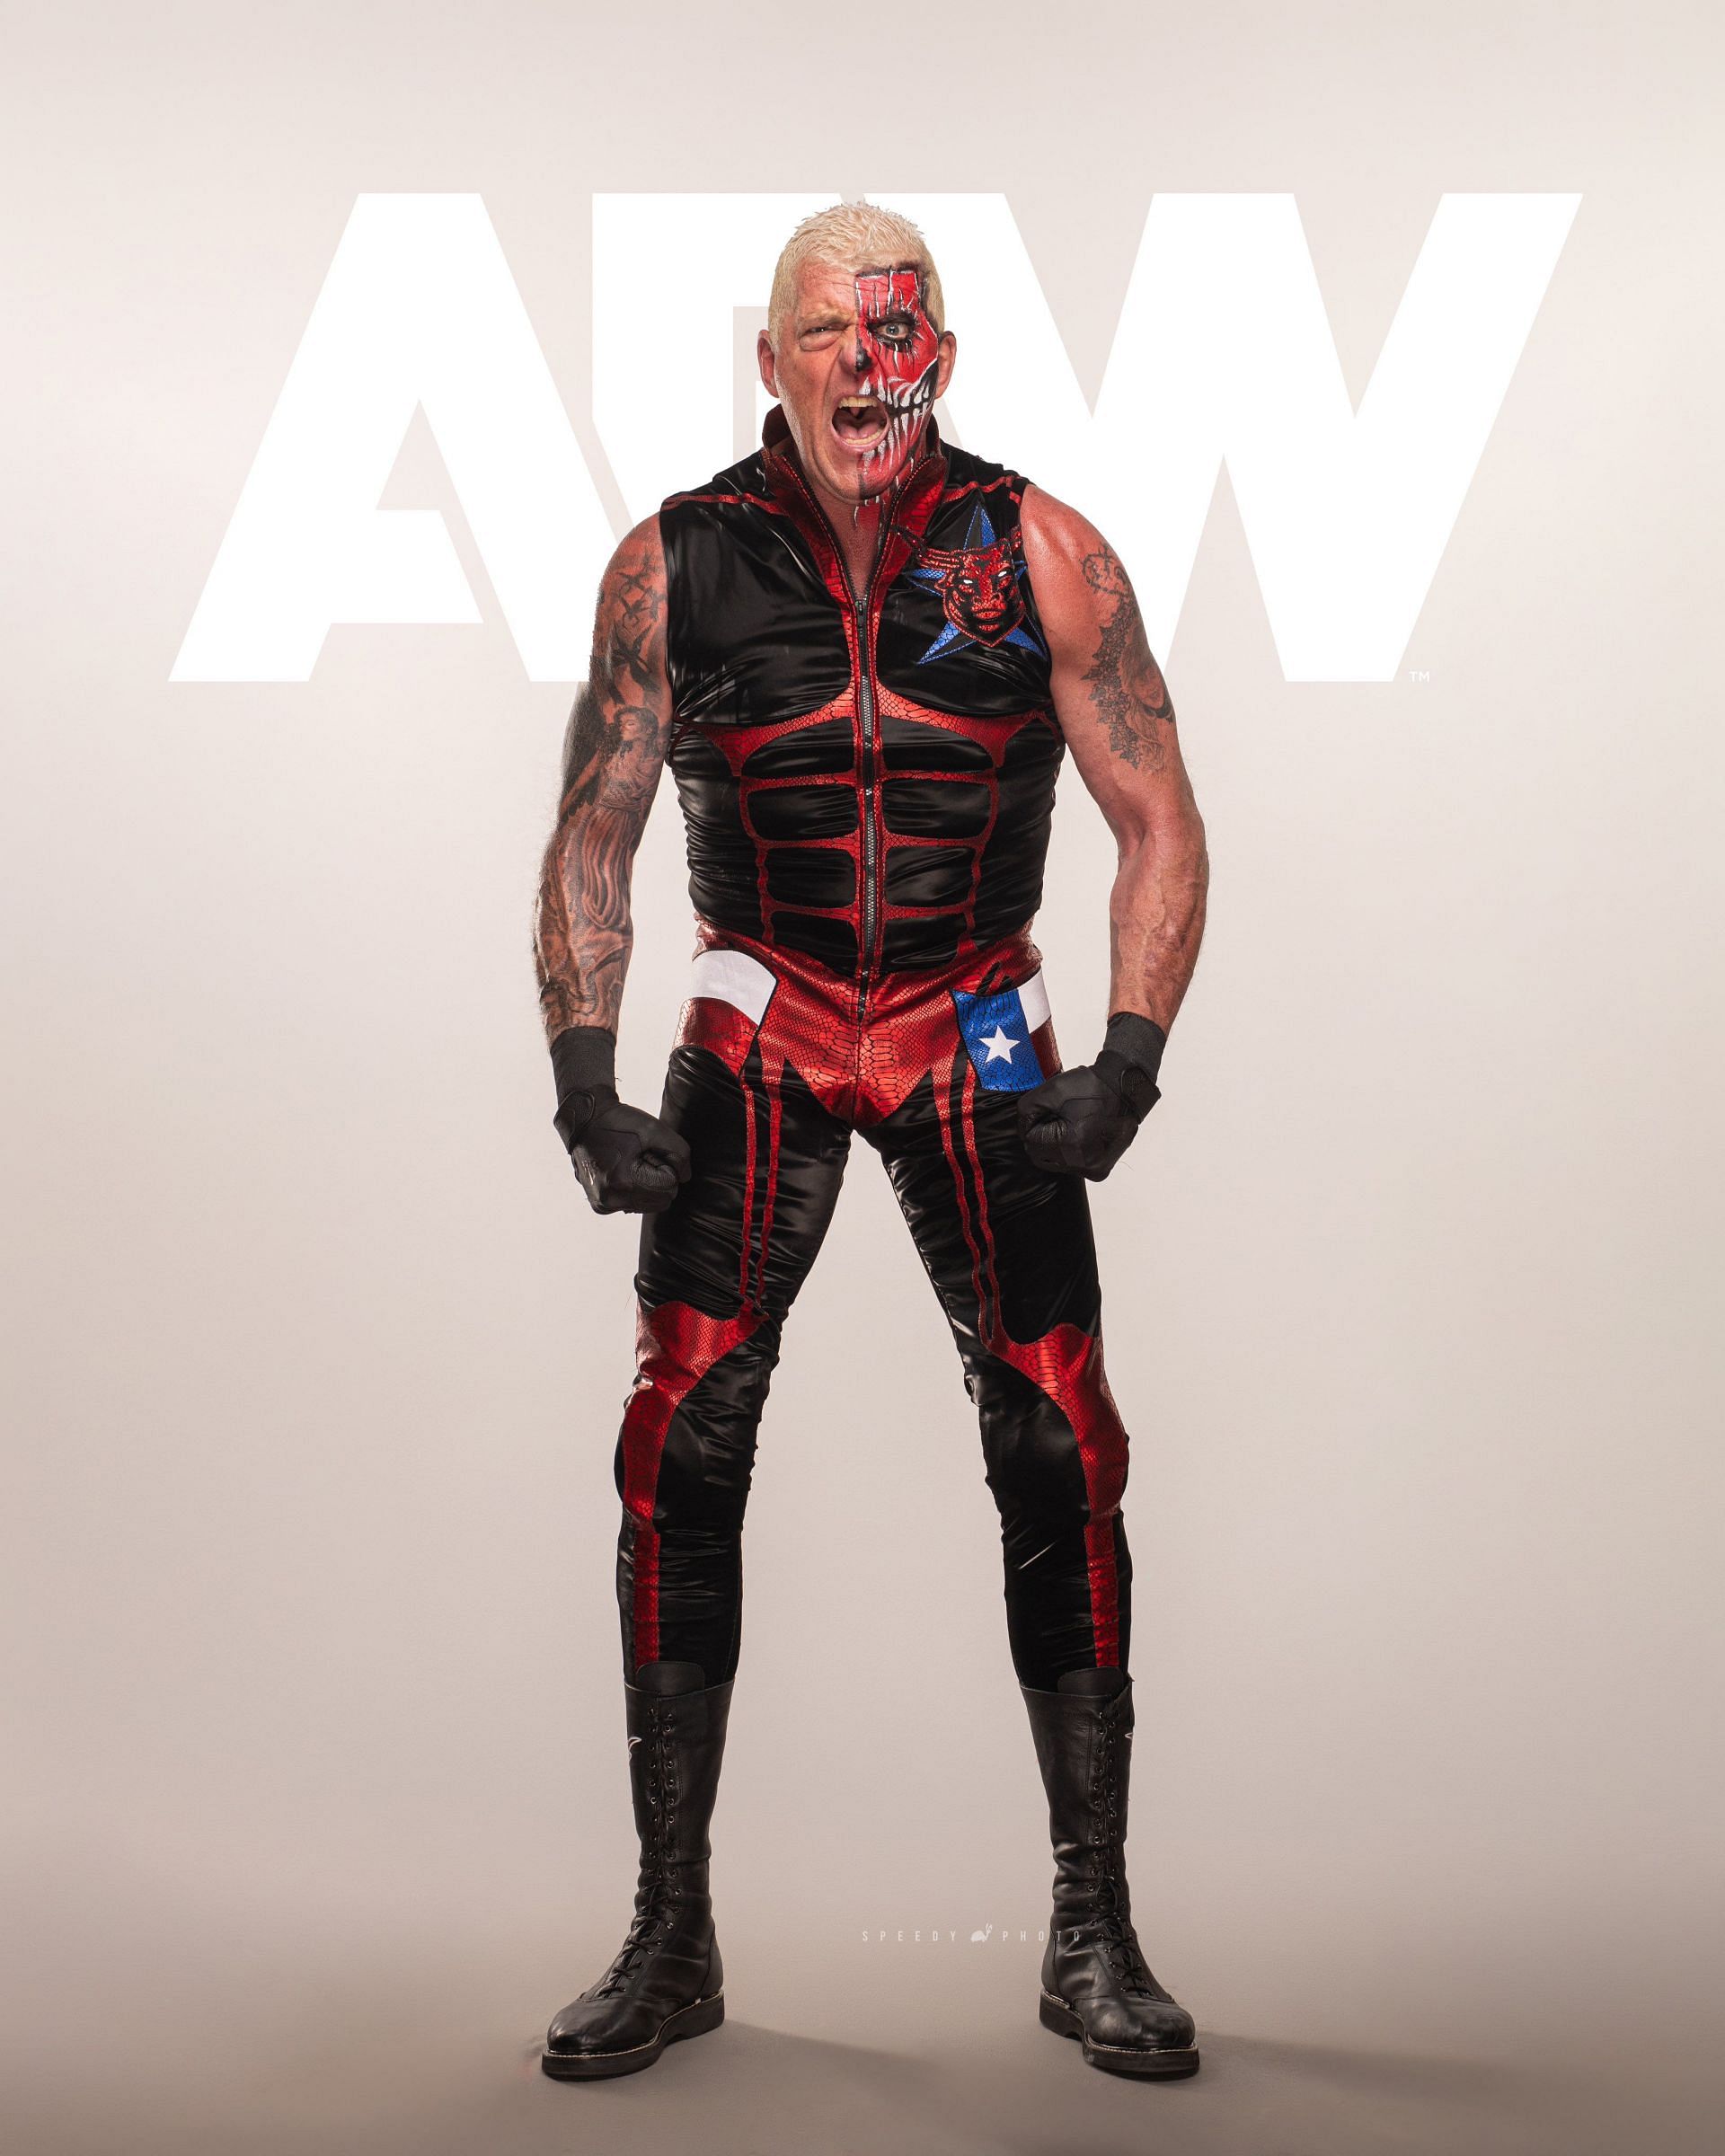 Will Dustin Rhodes re-sign with AEW?